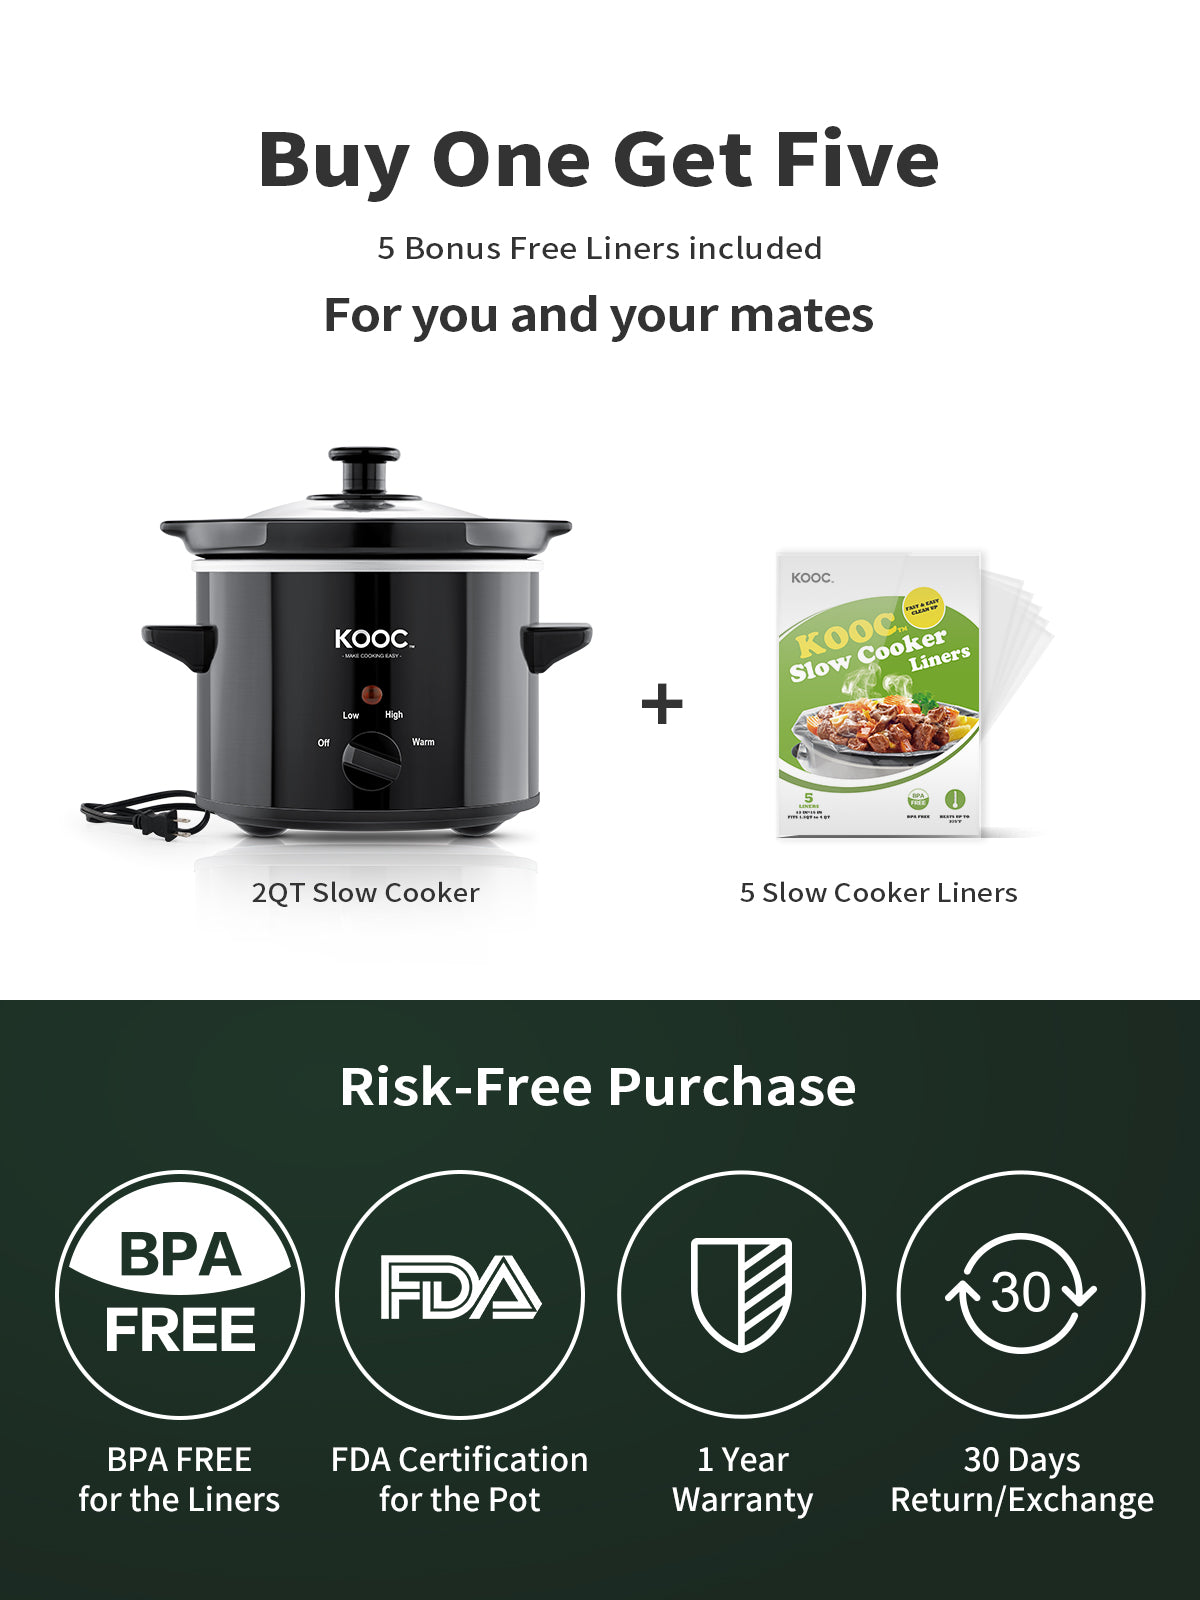 KOOC Small Slow Cooker, 2-Quart, Free Liners Included for Easy